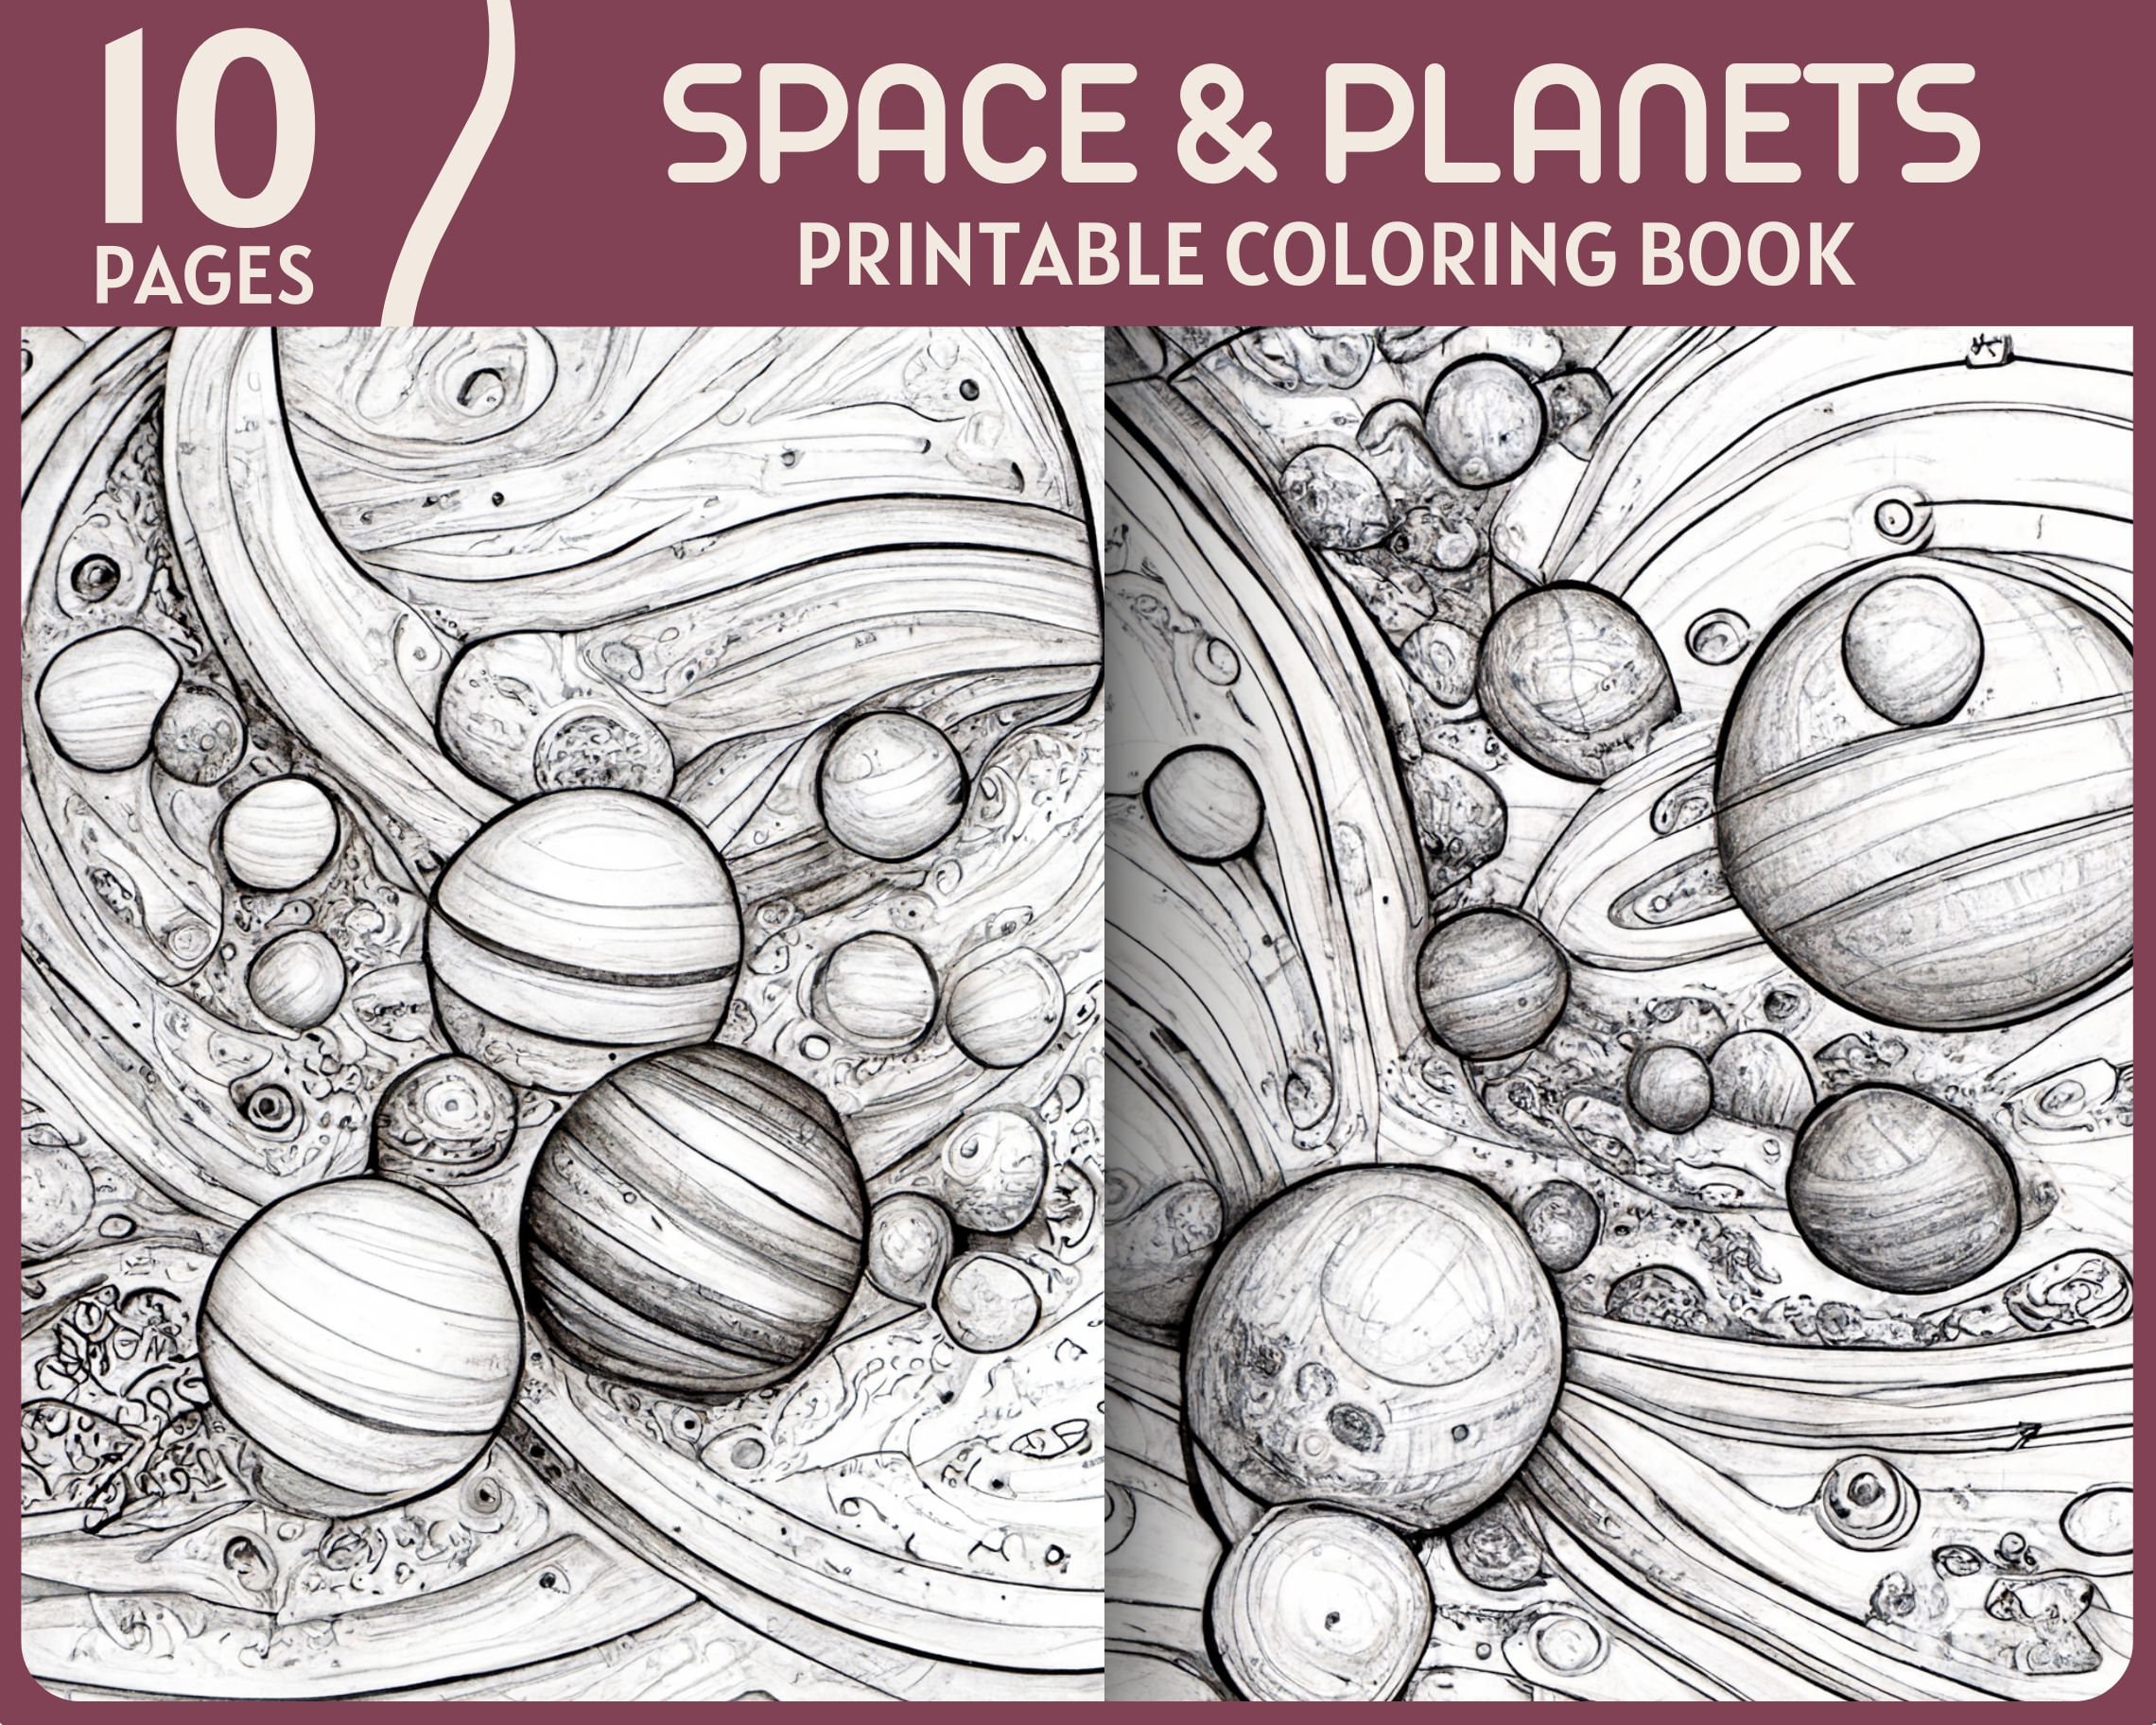 Space planets coloring pages fantasy art universe planet galaxy coloring book printable planet and space coloring page